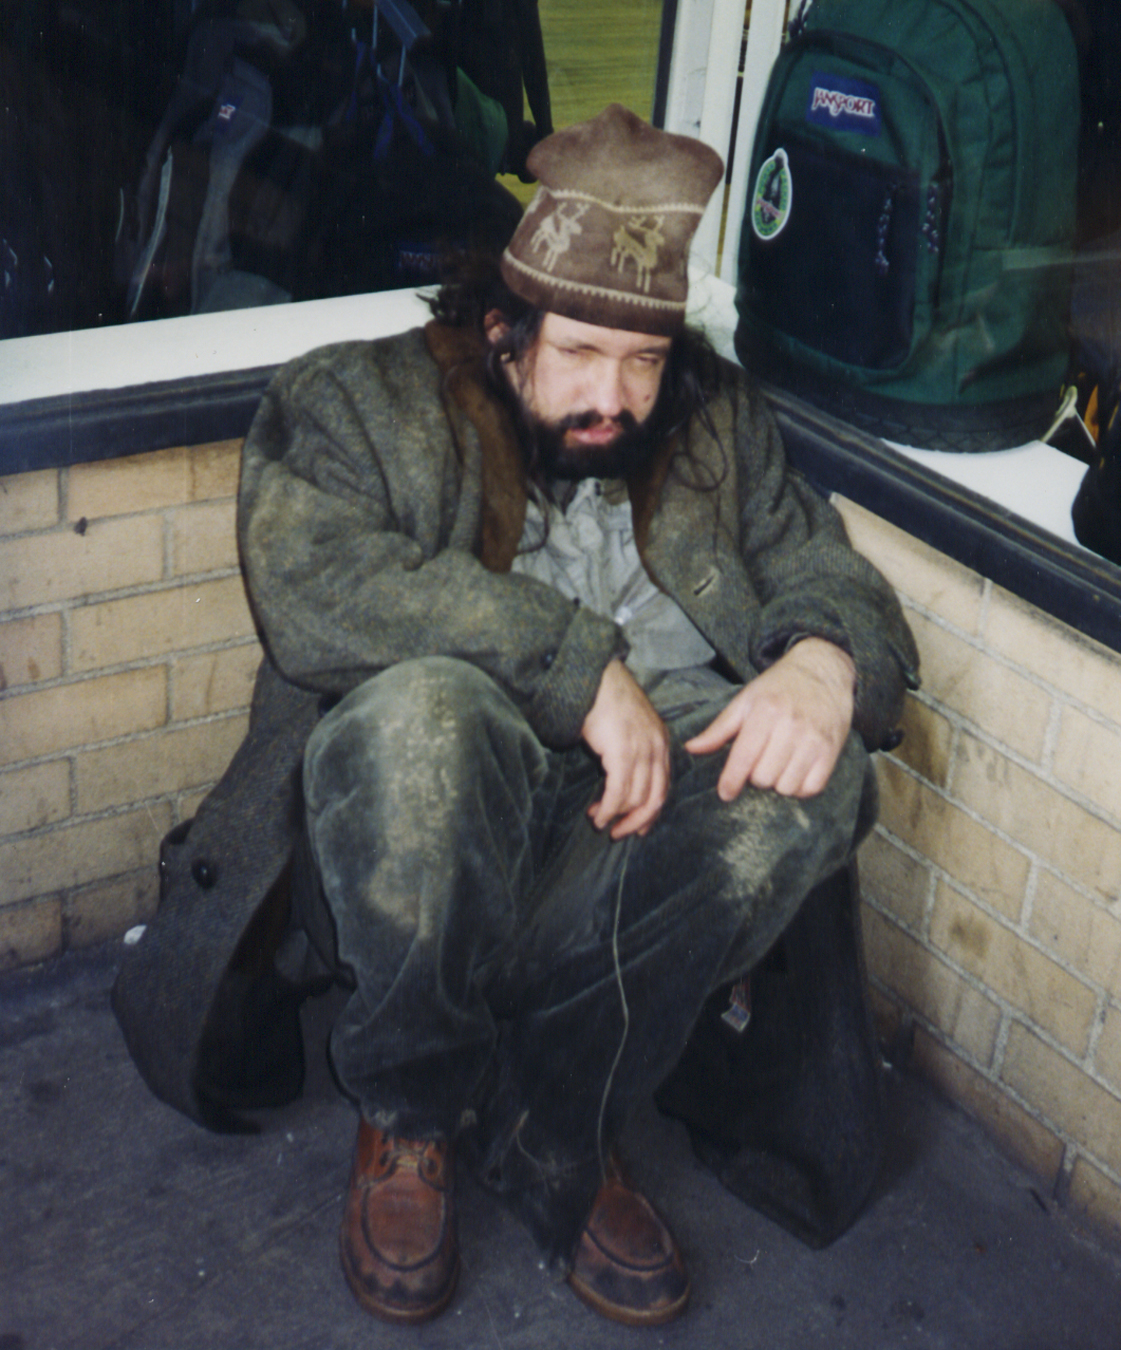 Here I am as a homeless man in the TV series Wonderland (originally titled Bellevue when we were filming it).